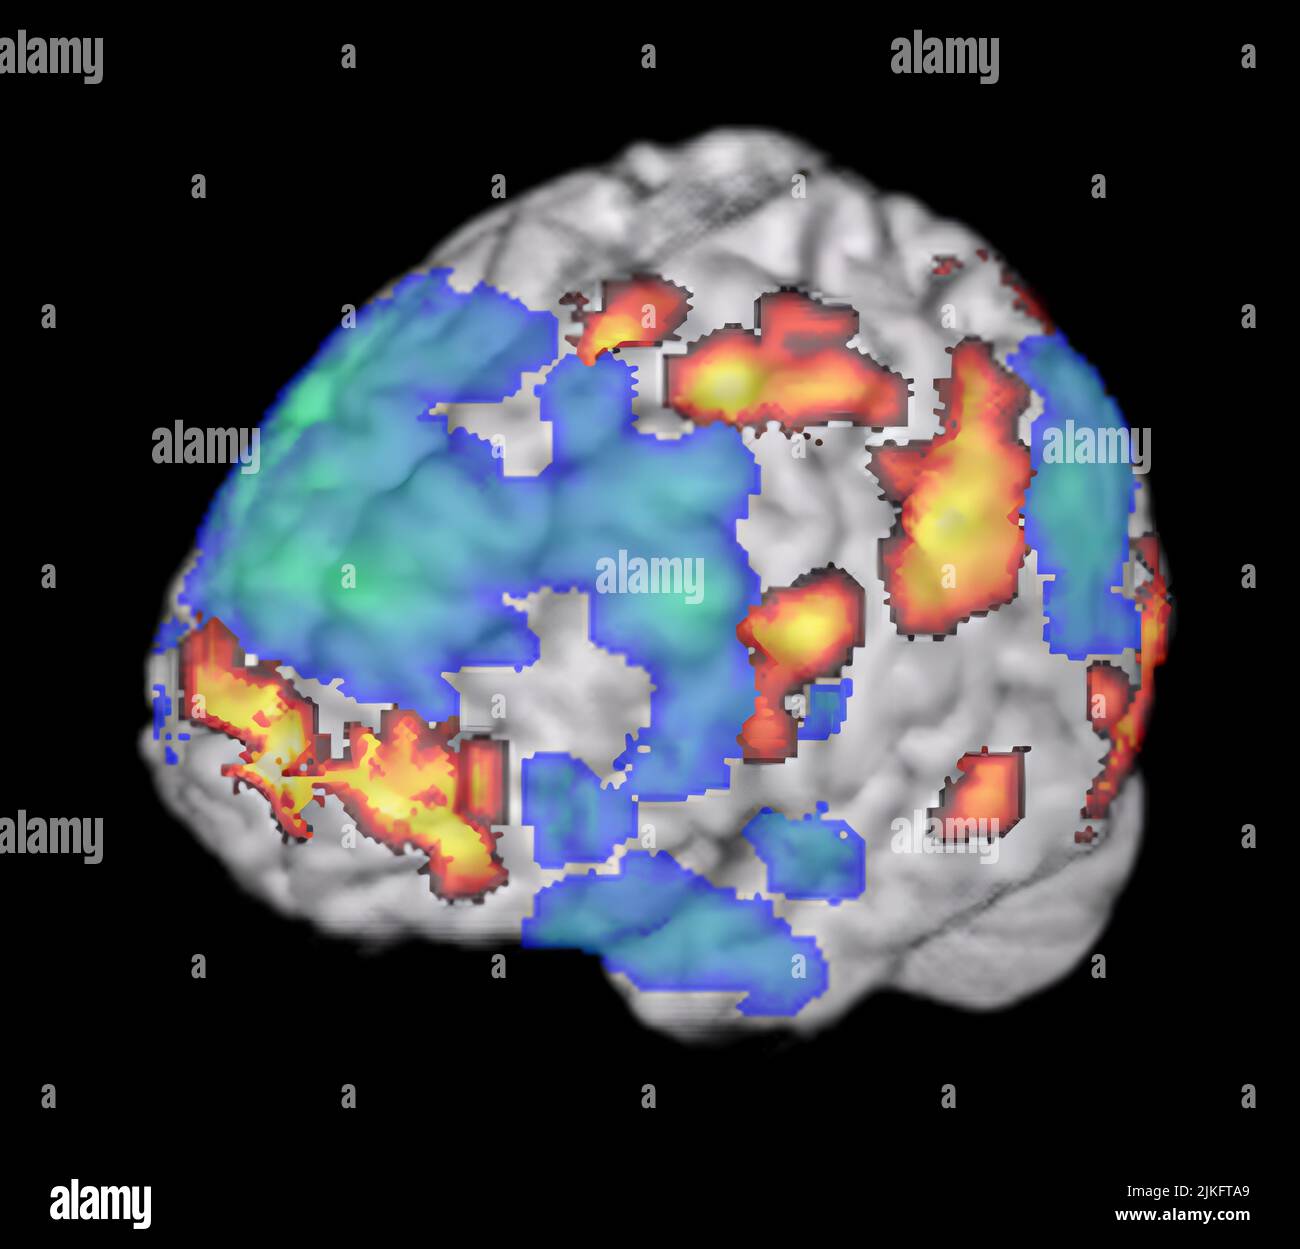 In February 2008, NIDCD researchers reported that they had used functional MRI to study the brains of musicians playing improvised jazz. The images revealed that a large region of the brain involved in monitoring one's performance shuts down during creative improvisation, while a small region involved in organizing self-initiated thoughts and behaviors is strongly activated. Stock Photo